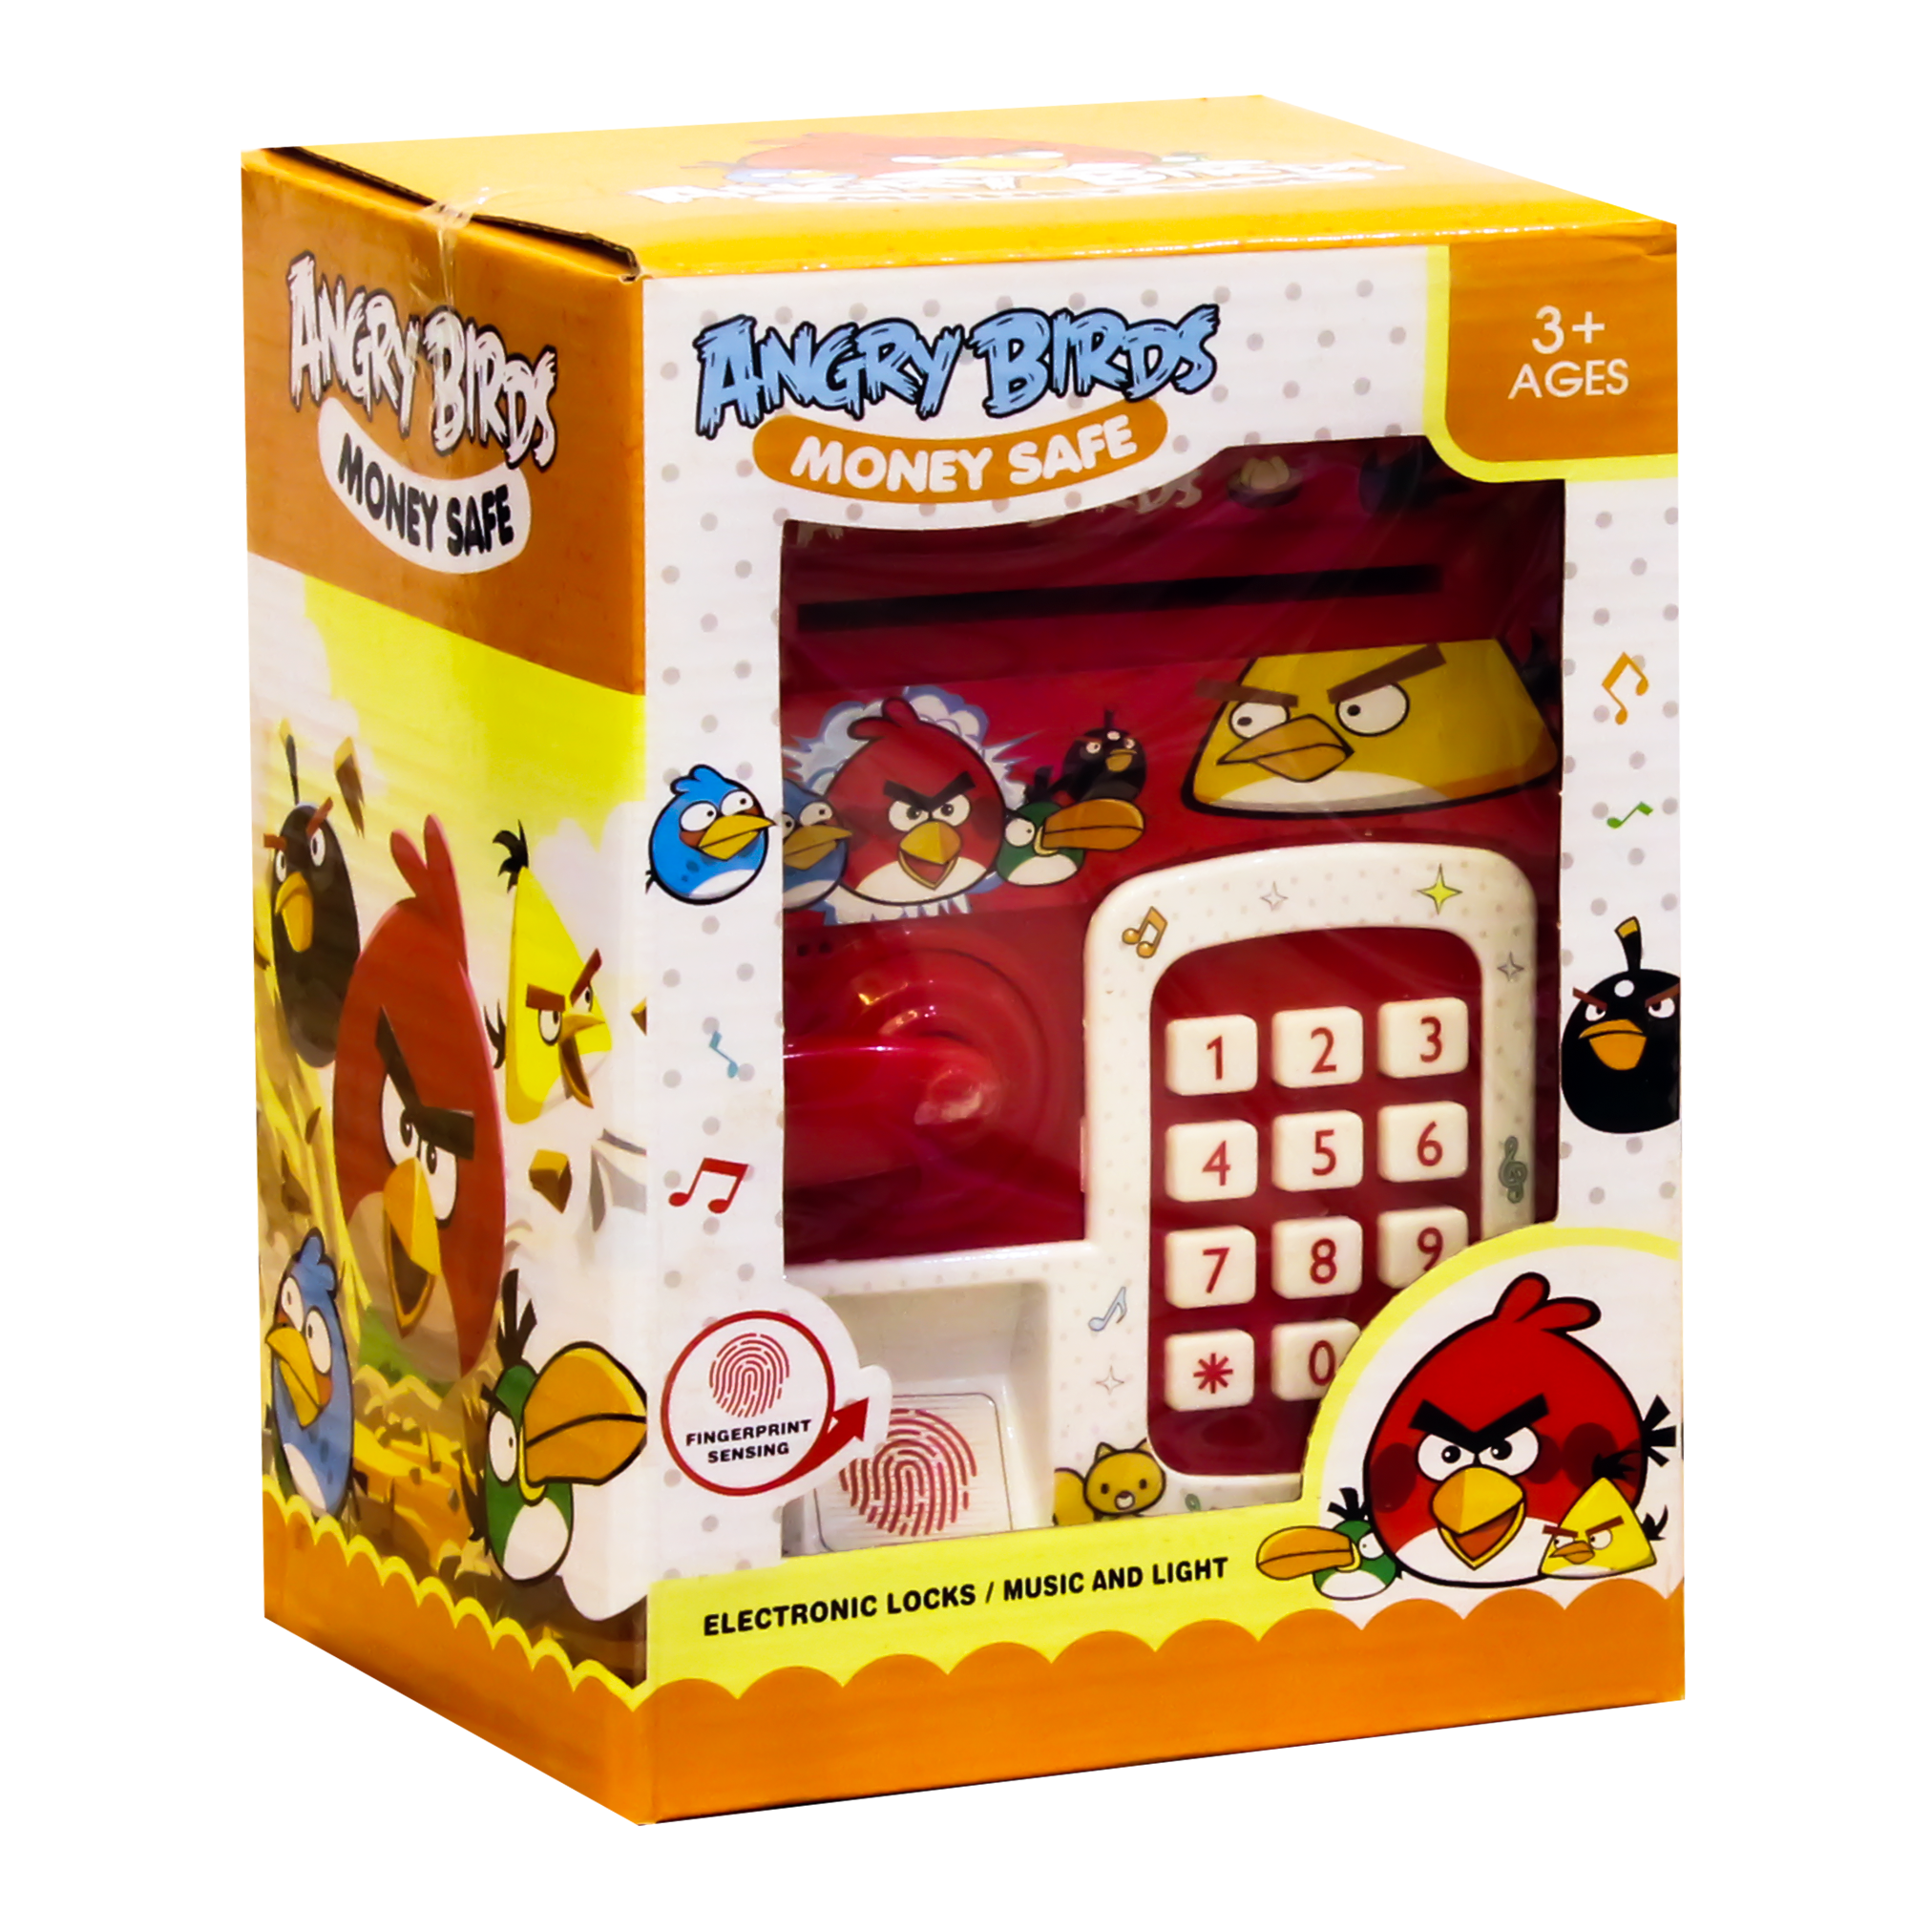 Angry birds ATM Saving Box with Finger Print and Password Unlock For Kids